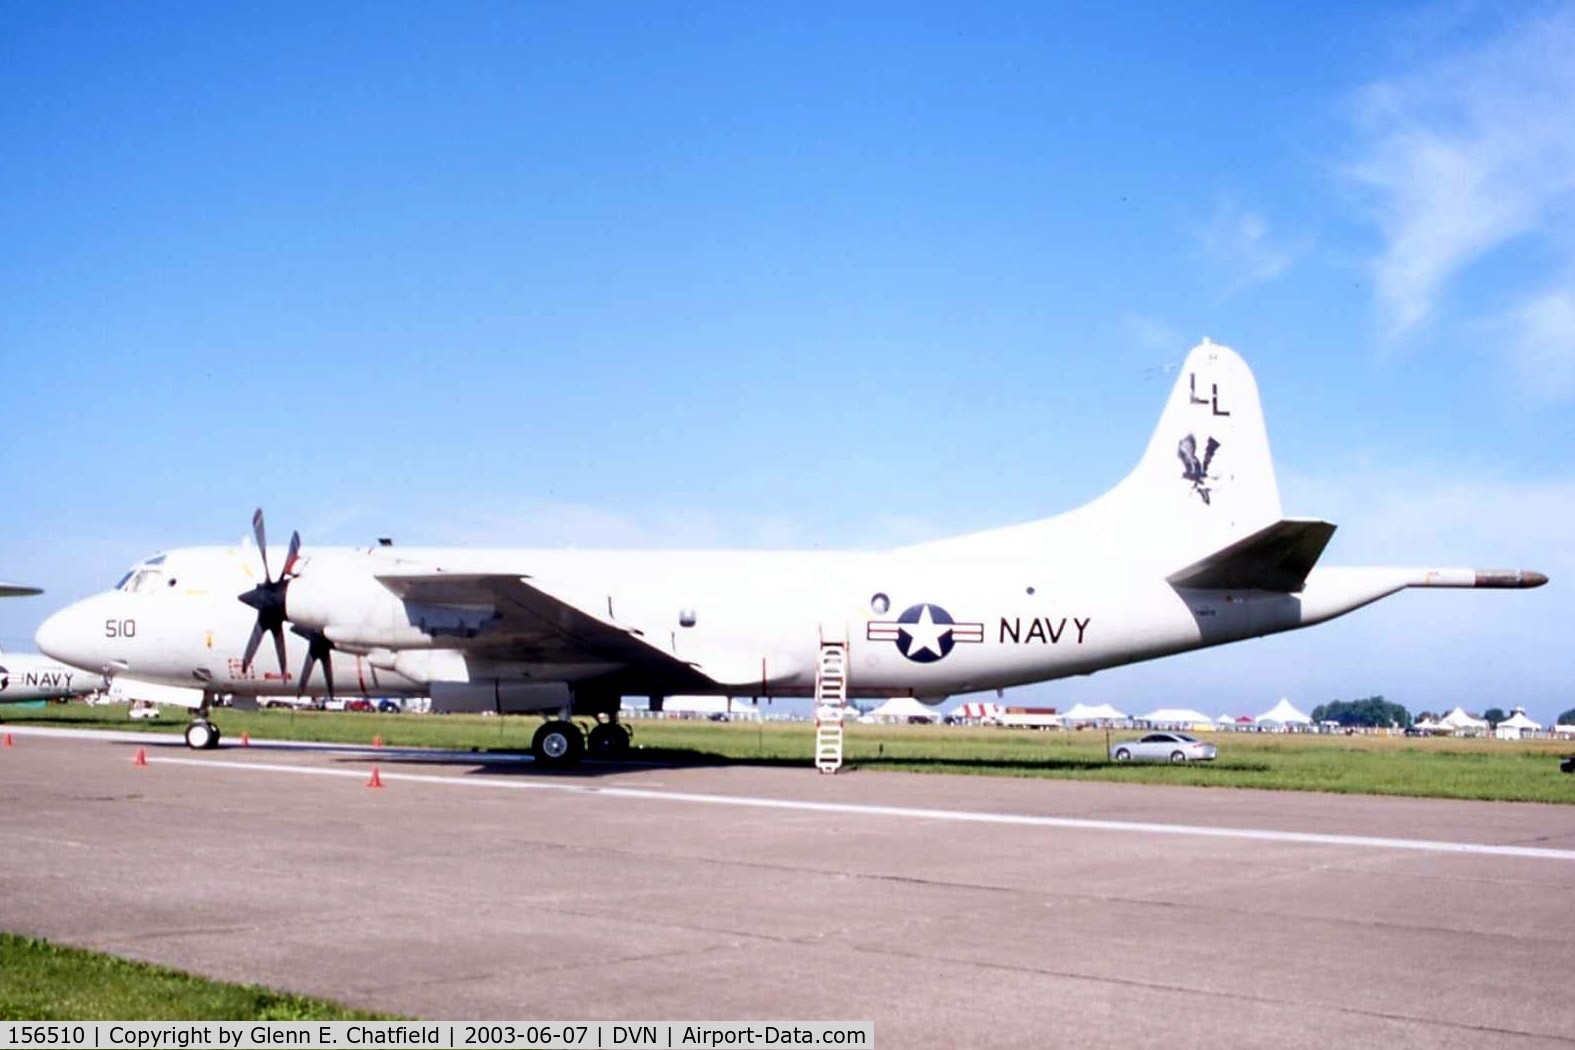 156510, 1968 Lockheed P-3C Orion C/N 285A-5504, P-3C at the Quad Cities Air Show